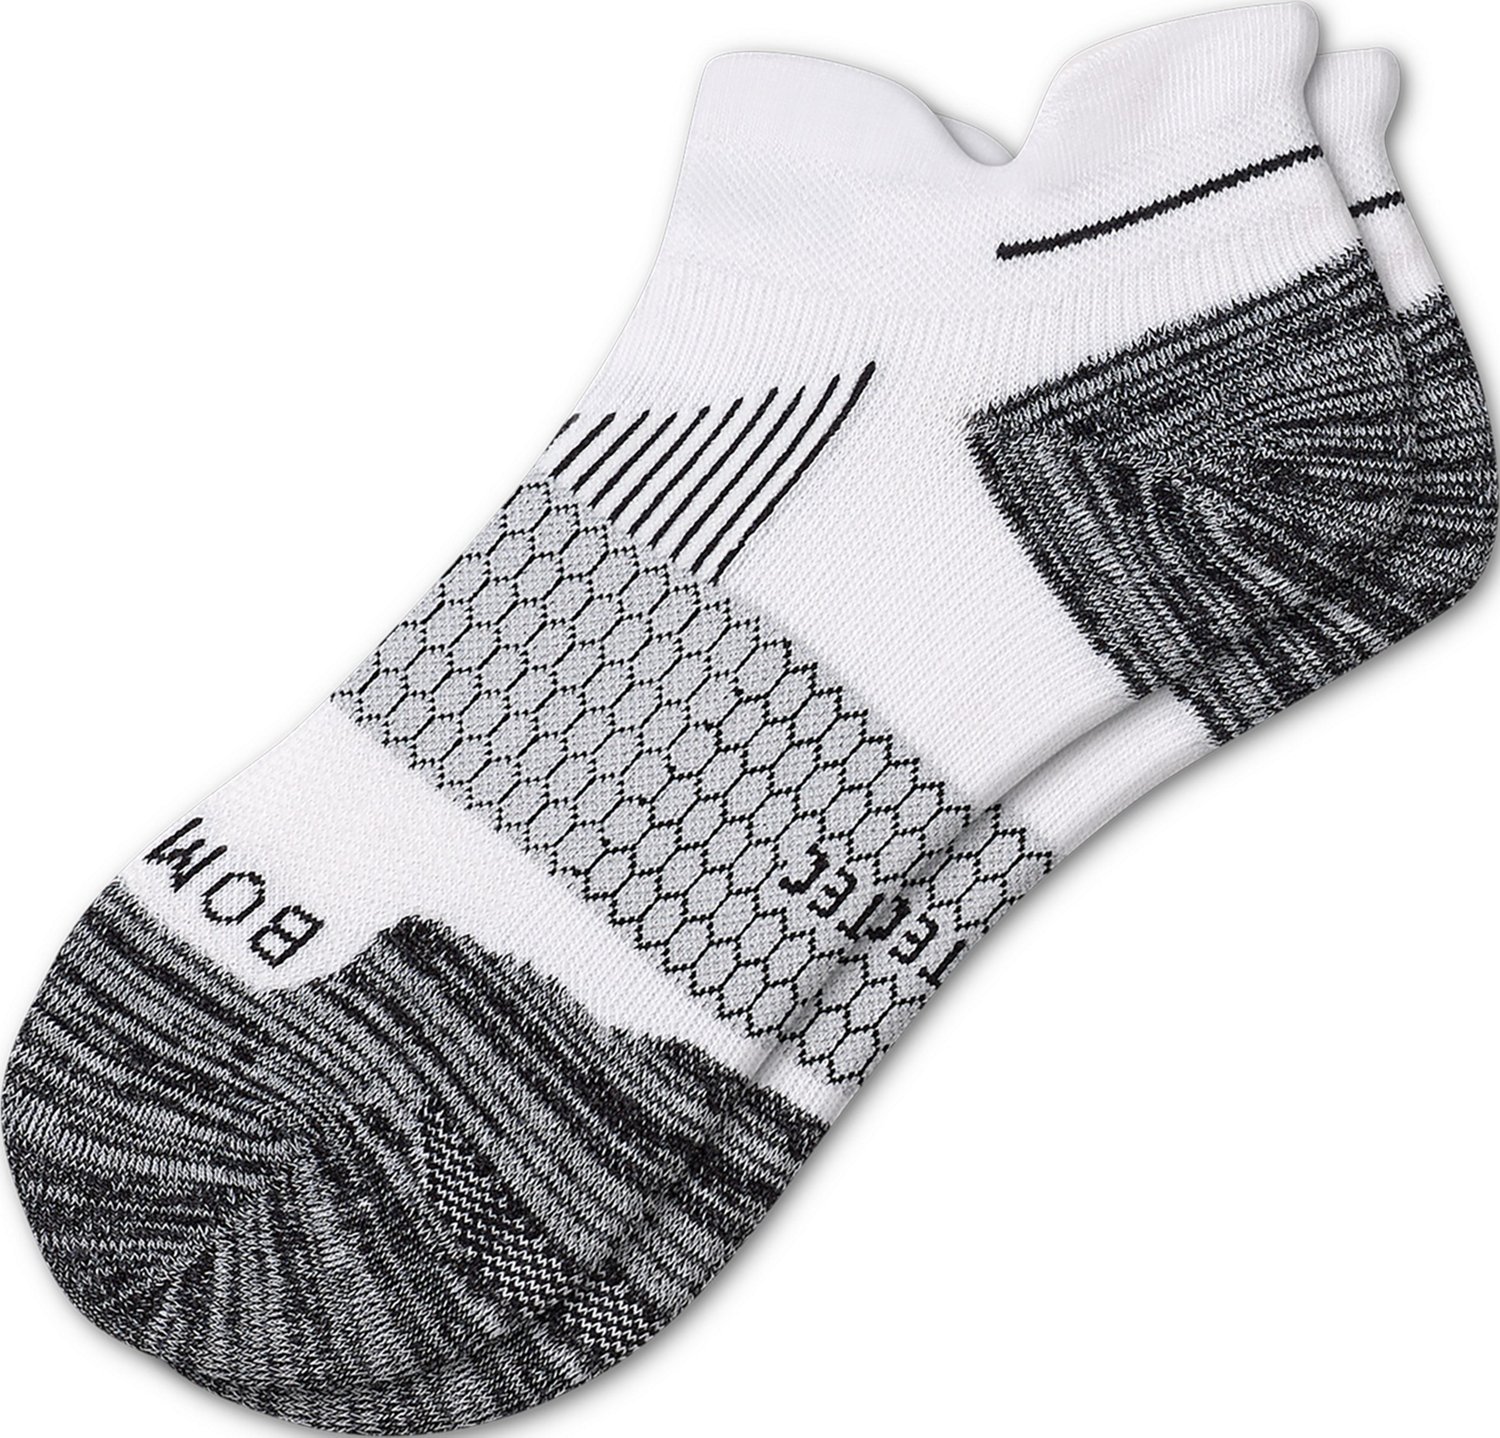 Bombas Performance Running Ankle Socks | Free Shipping at Academy